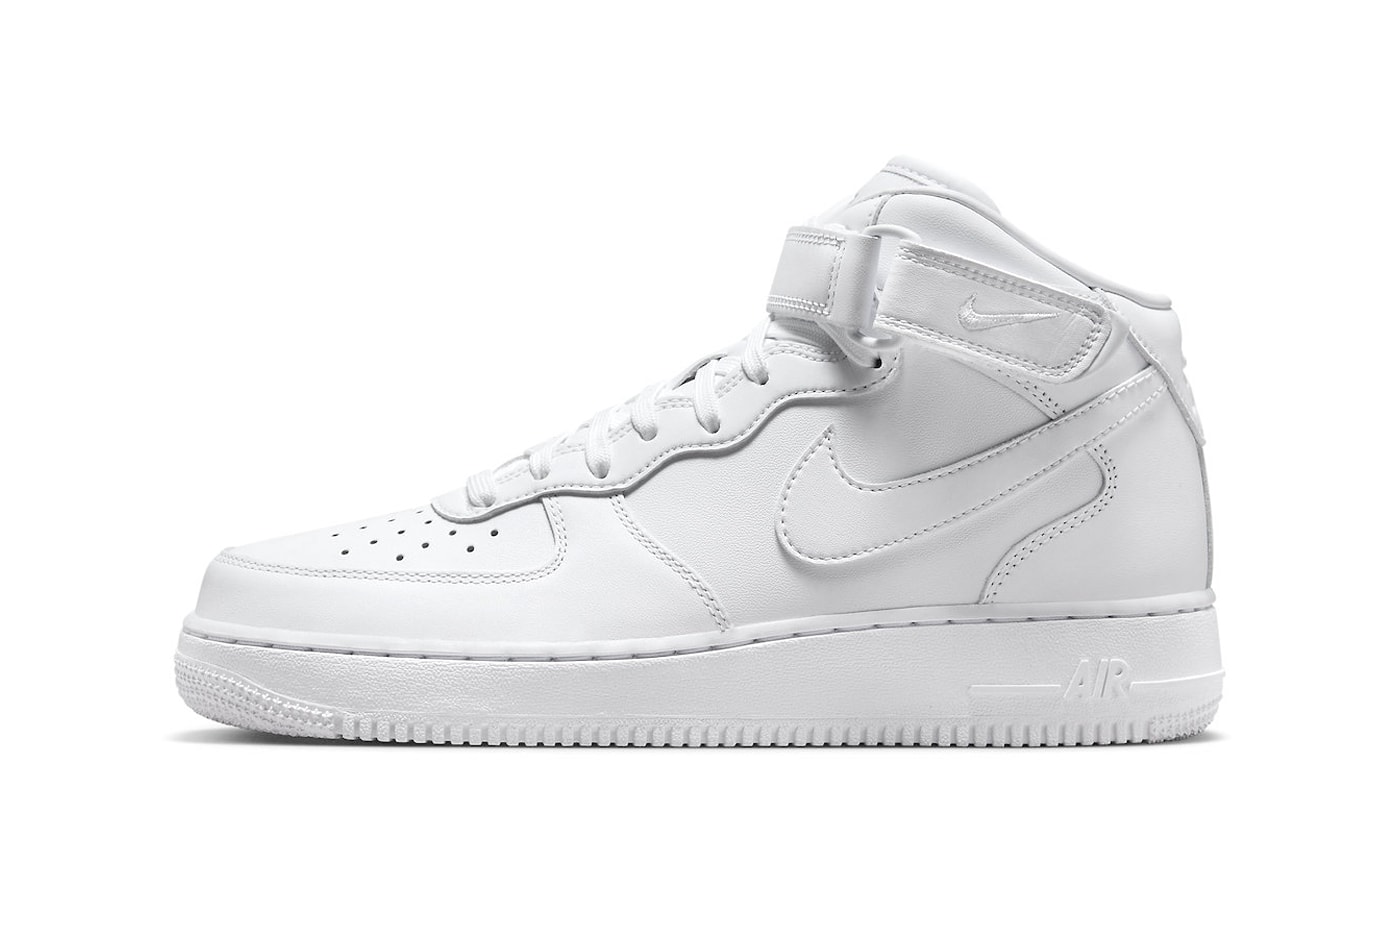 Nike's Air Force 1 Mid Gets Its Shine On - Sneaker Freaker